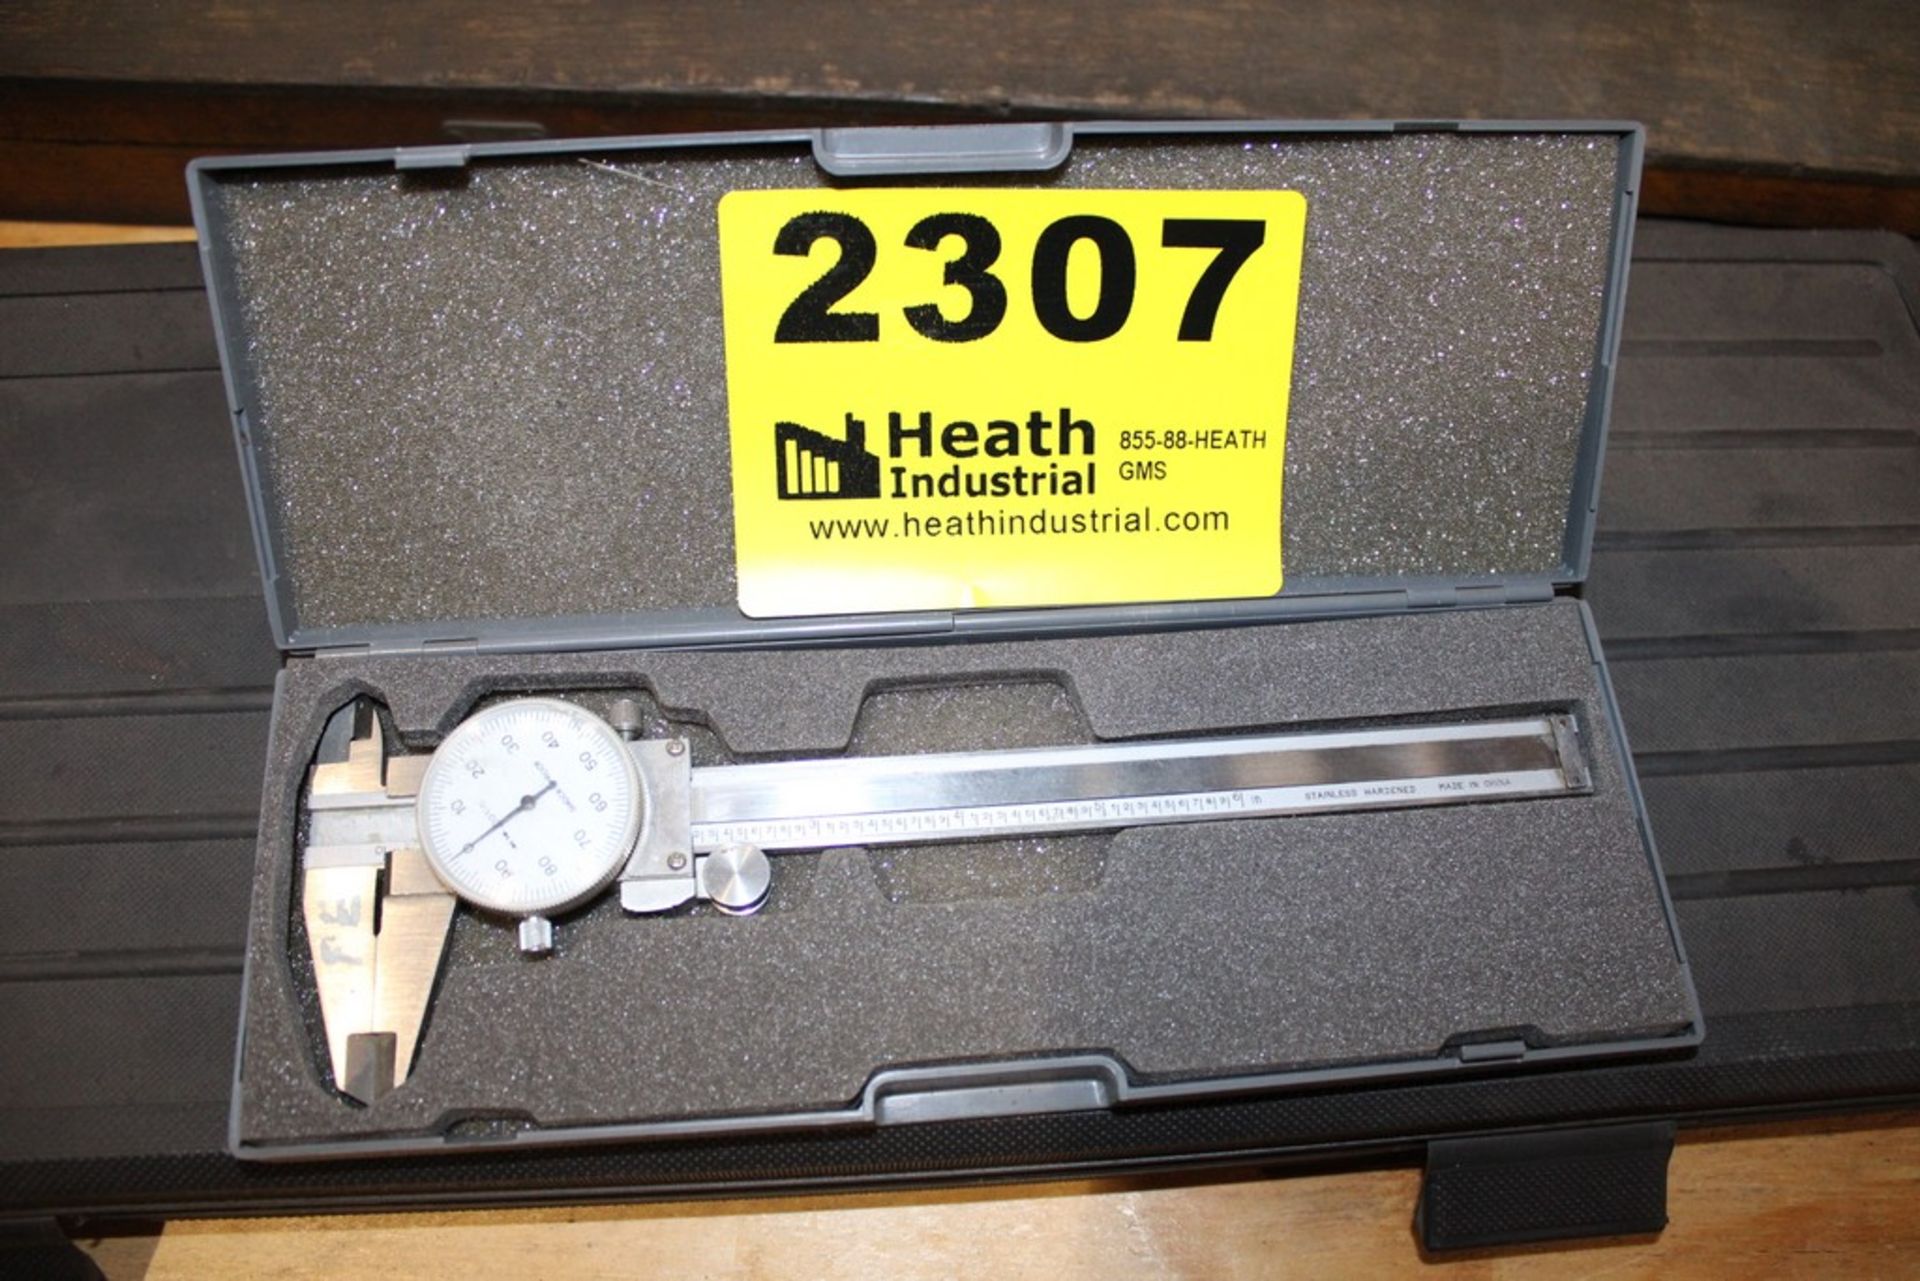 6" DIAL CALIPER WITH CASE